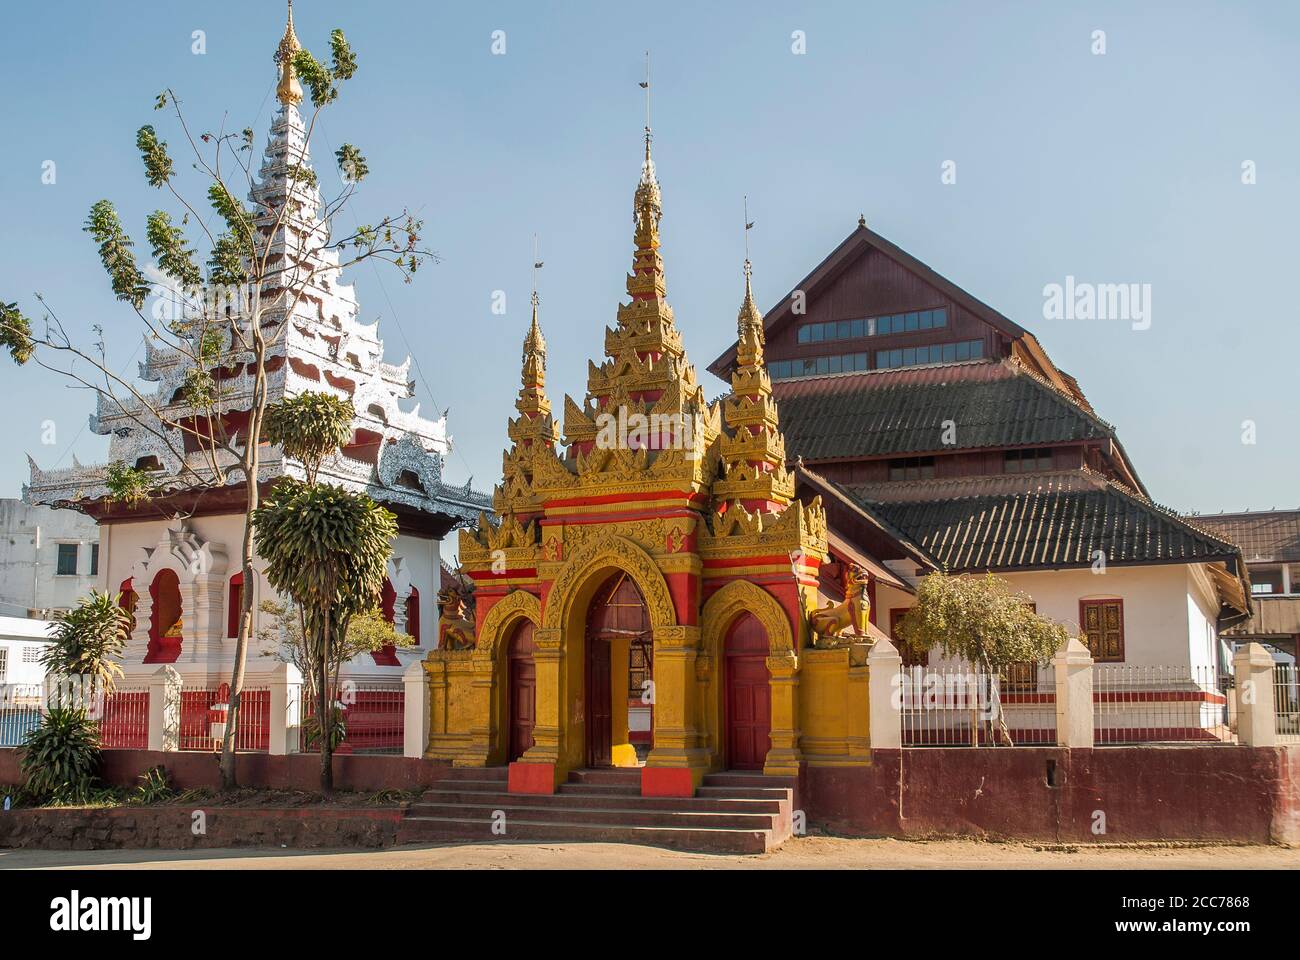 Buddhistische Pagode und Tempel, Kengtung, Shan Staat, Myanmar Stockfoto